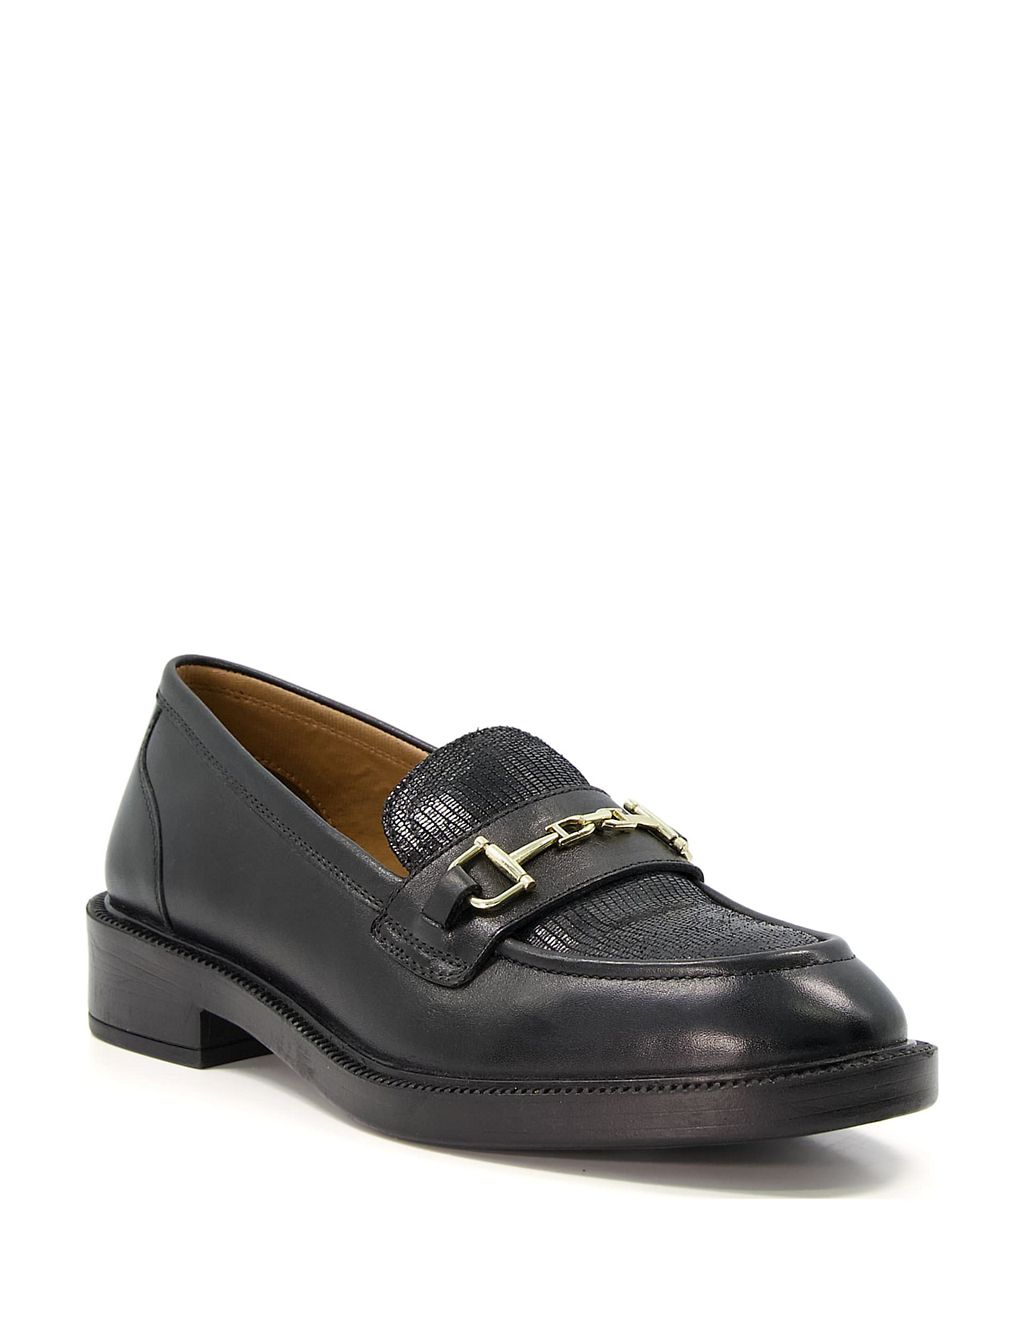 Leather Bar Trim Flat Loafers | Dune London | M&S